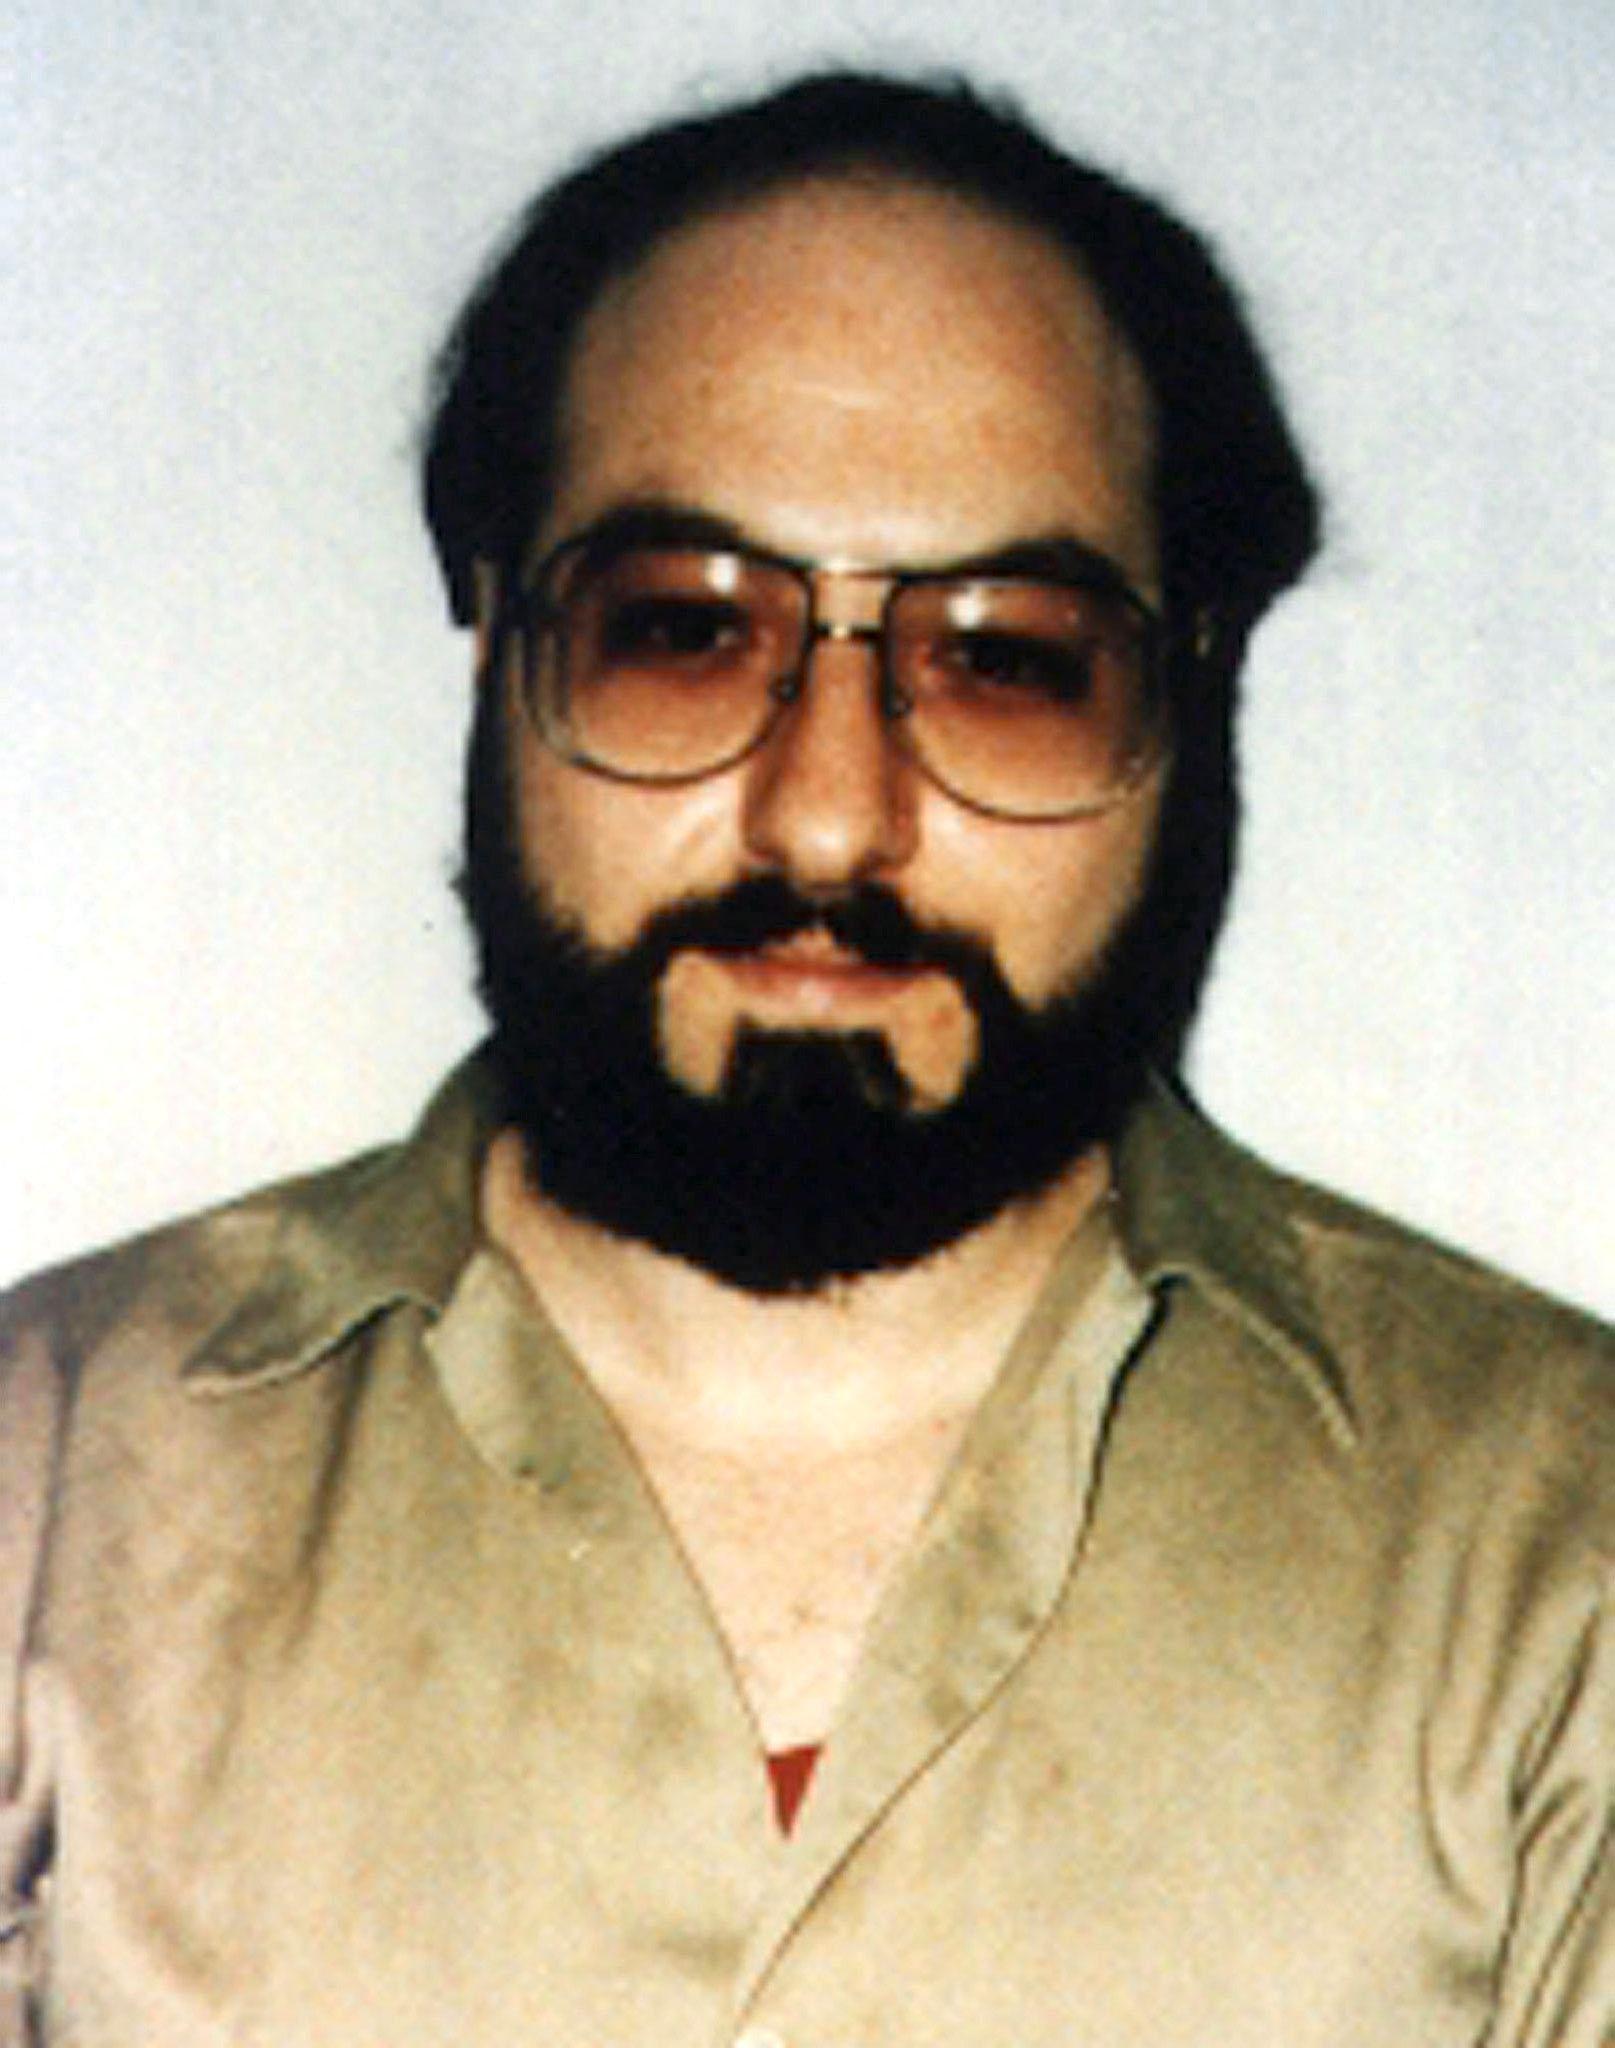 Jonathan Pollard is pictured in this May 1991 file photo, six years after his 1985 arrest.